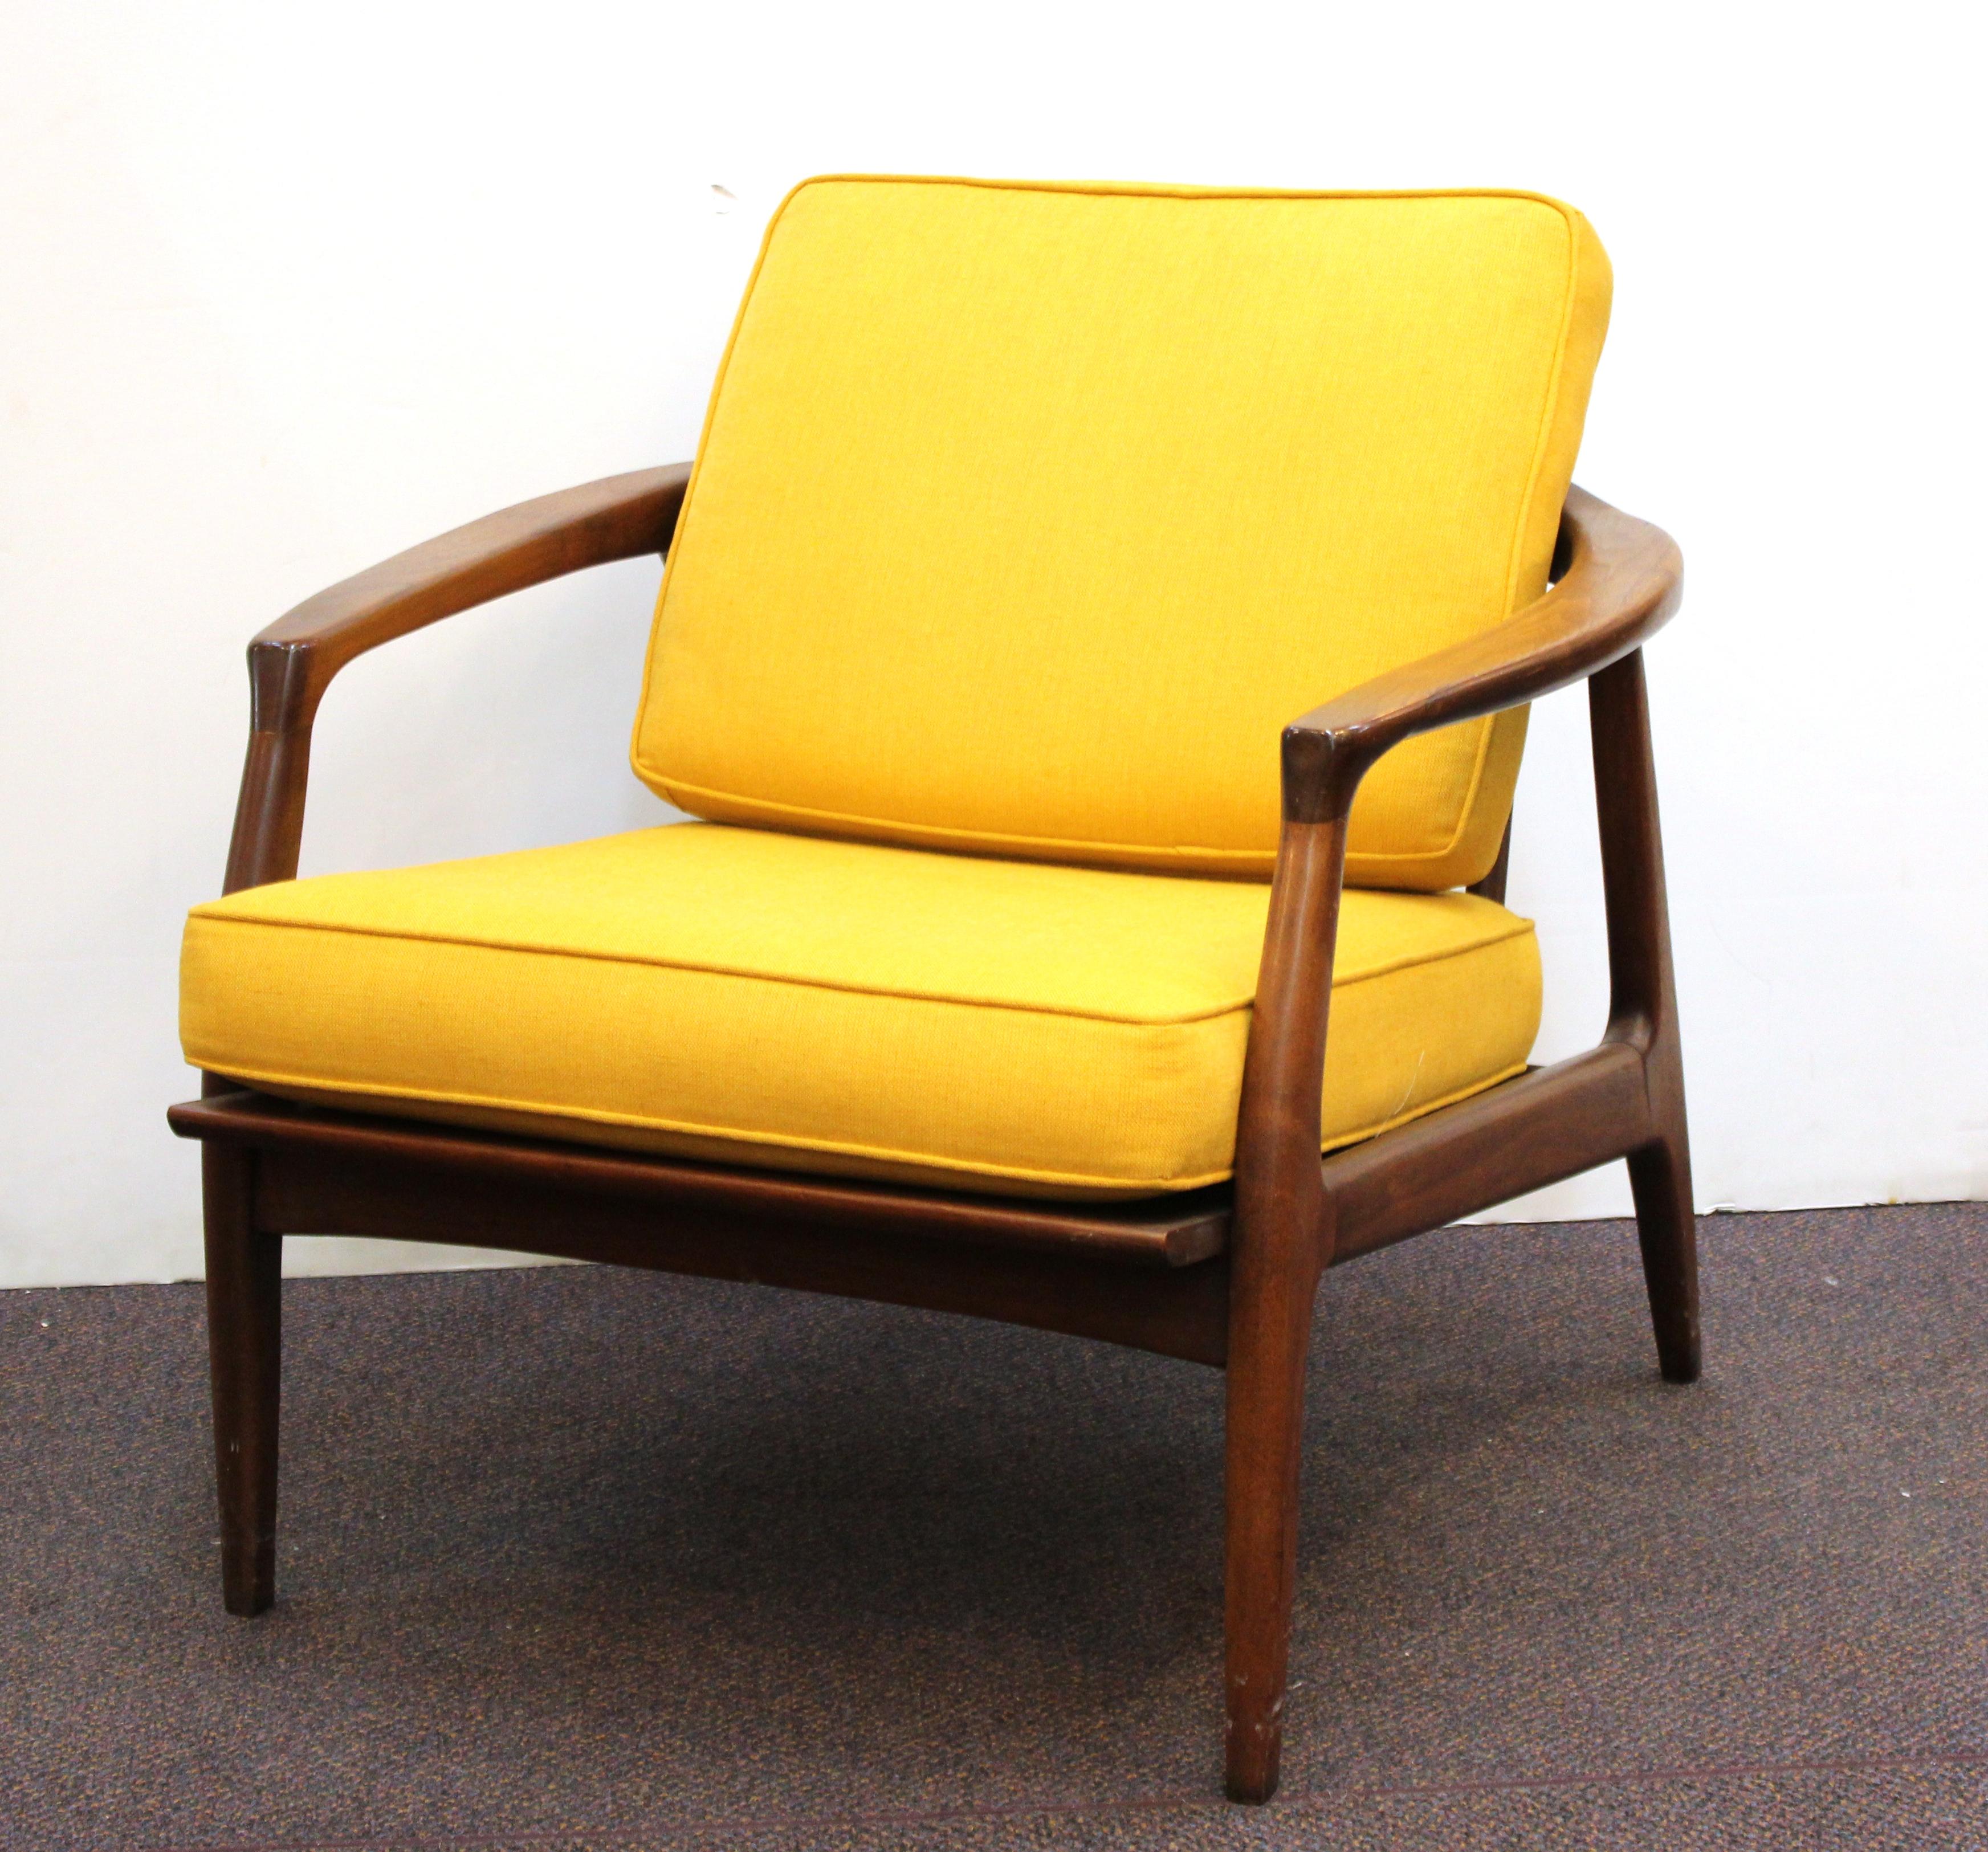 Pair of Mid-Century Modern lounge chairs designed by Milo Baughman for Thayer Coggin in the mid-20th century. The pair is made in wood and has upholstered seat and back cushion. Milo Baughman for Thayer Coggin label on the seat underneath cushion.